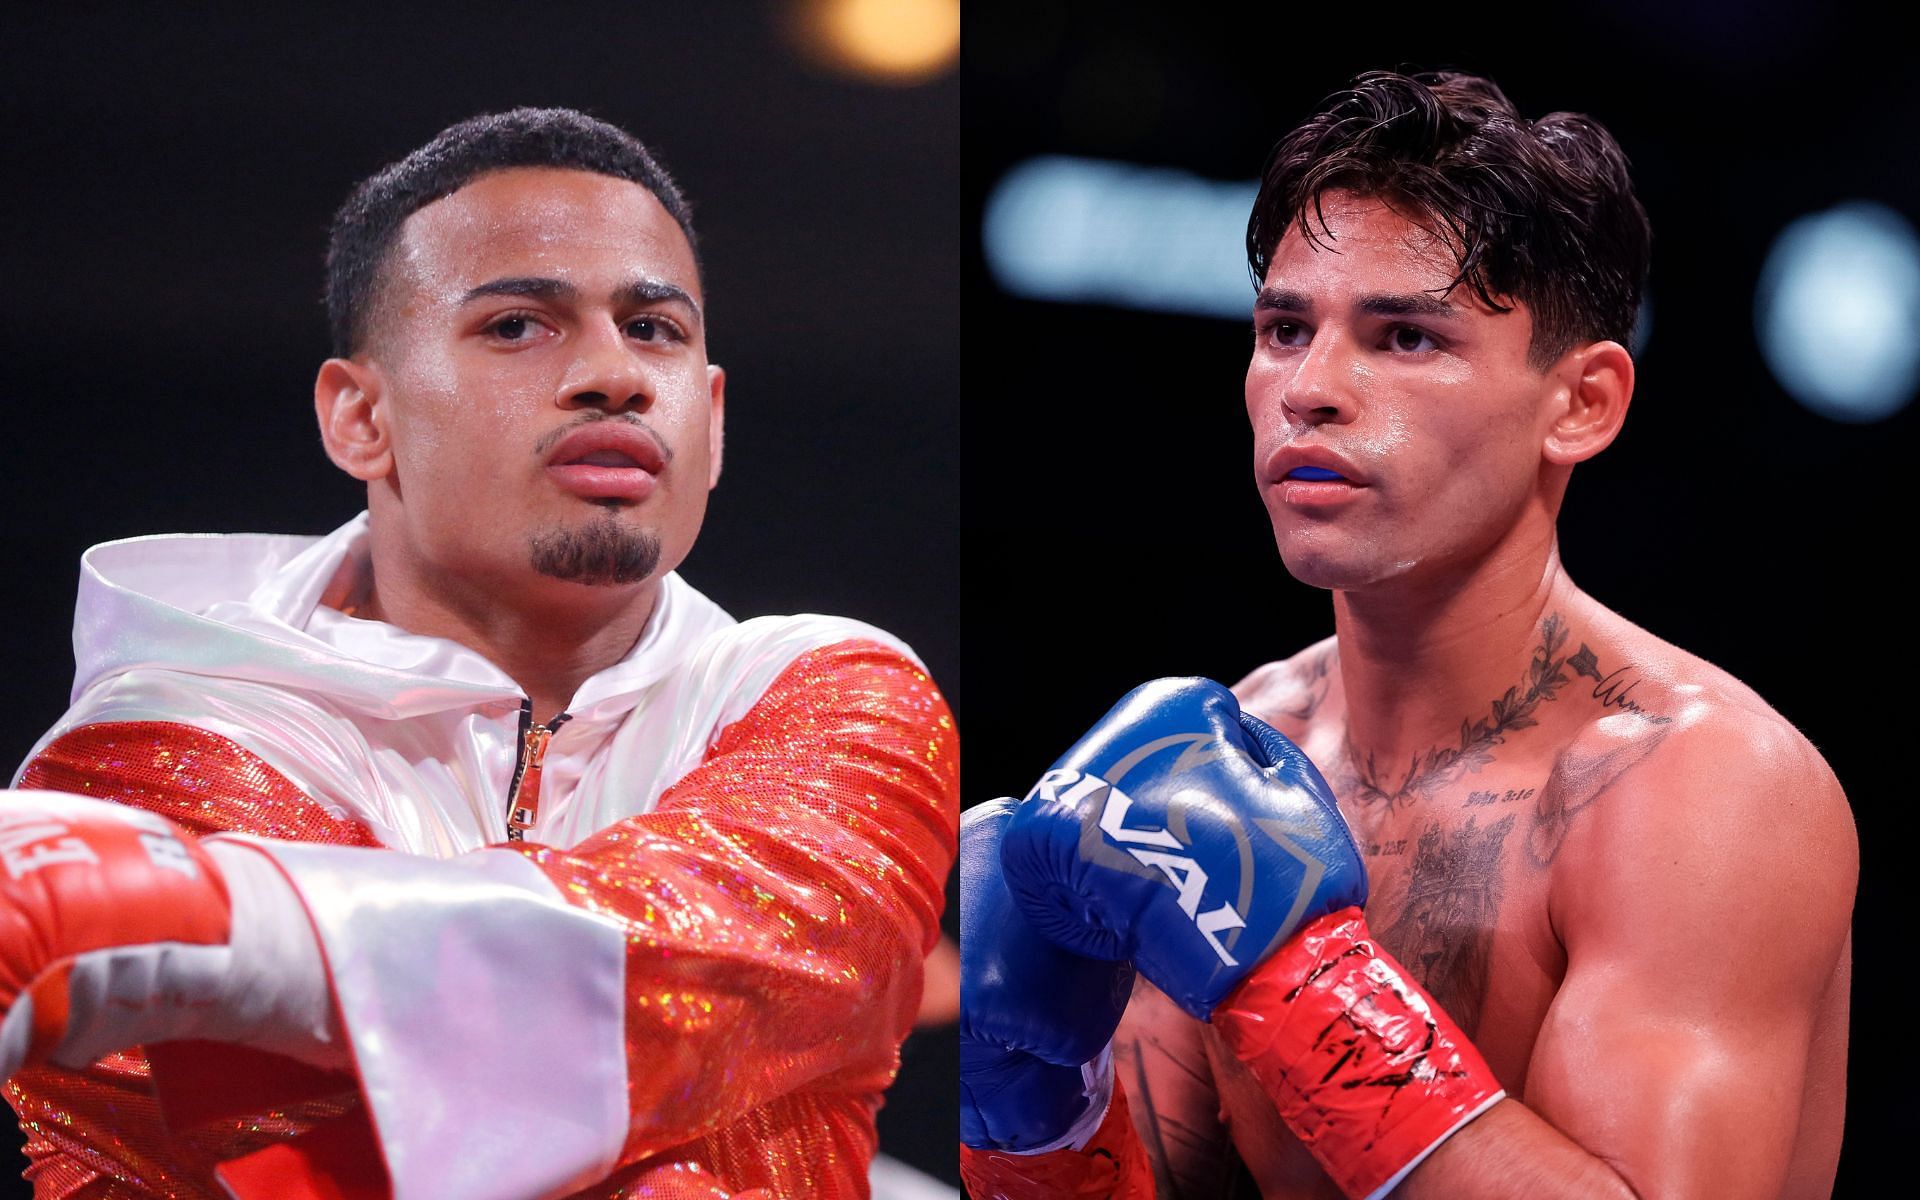 Rolly Romero (left) was previously expected to clash with Ryan Garcia (right) inside the squared circle [Images courtesy: Getty Images]